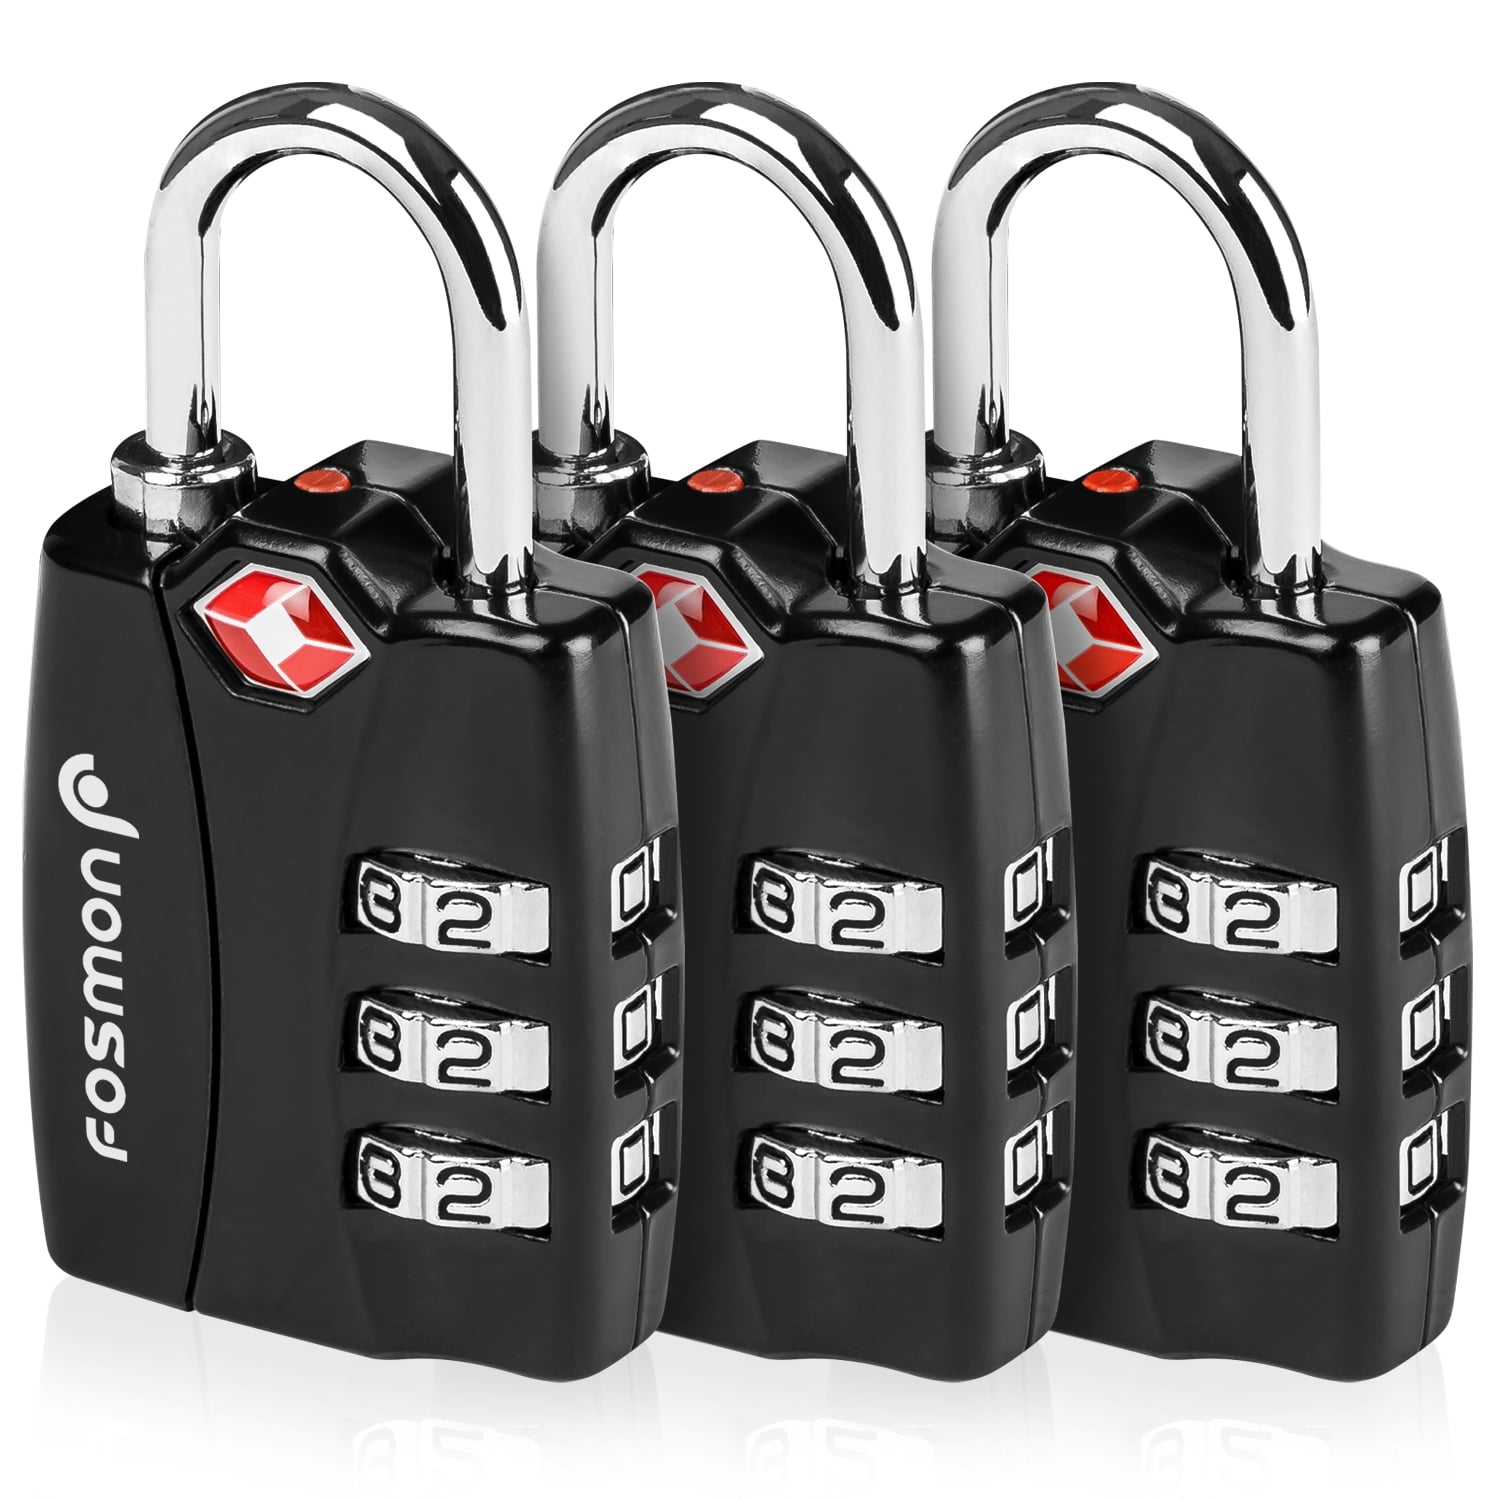 4 Digit Combination Lock Cabinet with Alloy Body Small Padlock for School Gym Locker Luggage Lock Backpack Lock Suitcase Lock TSA Approved Travel Lock 